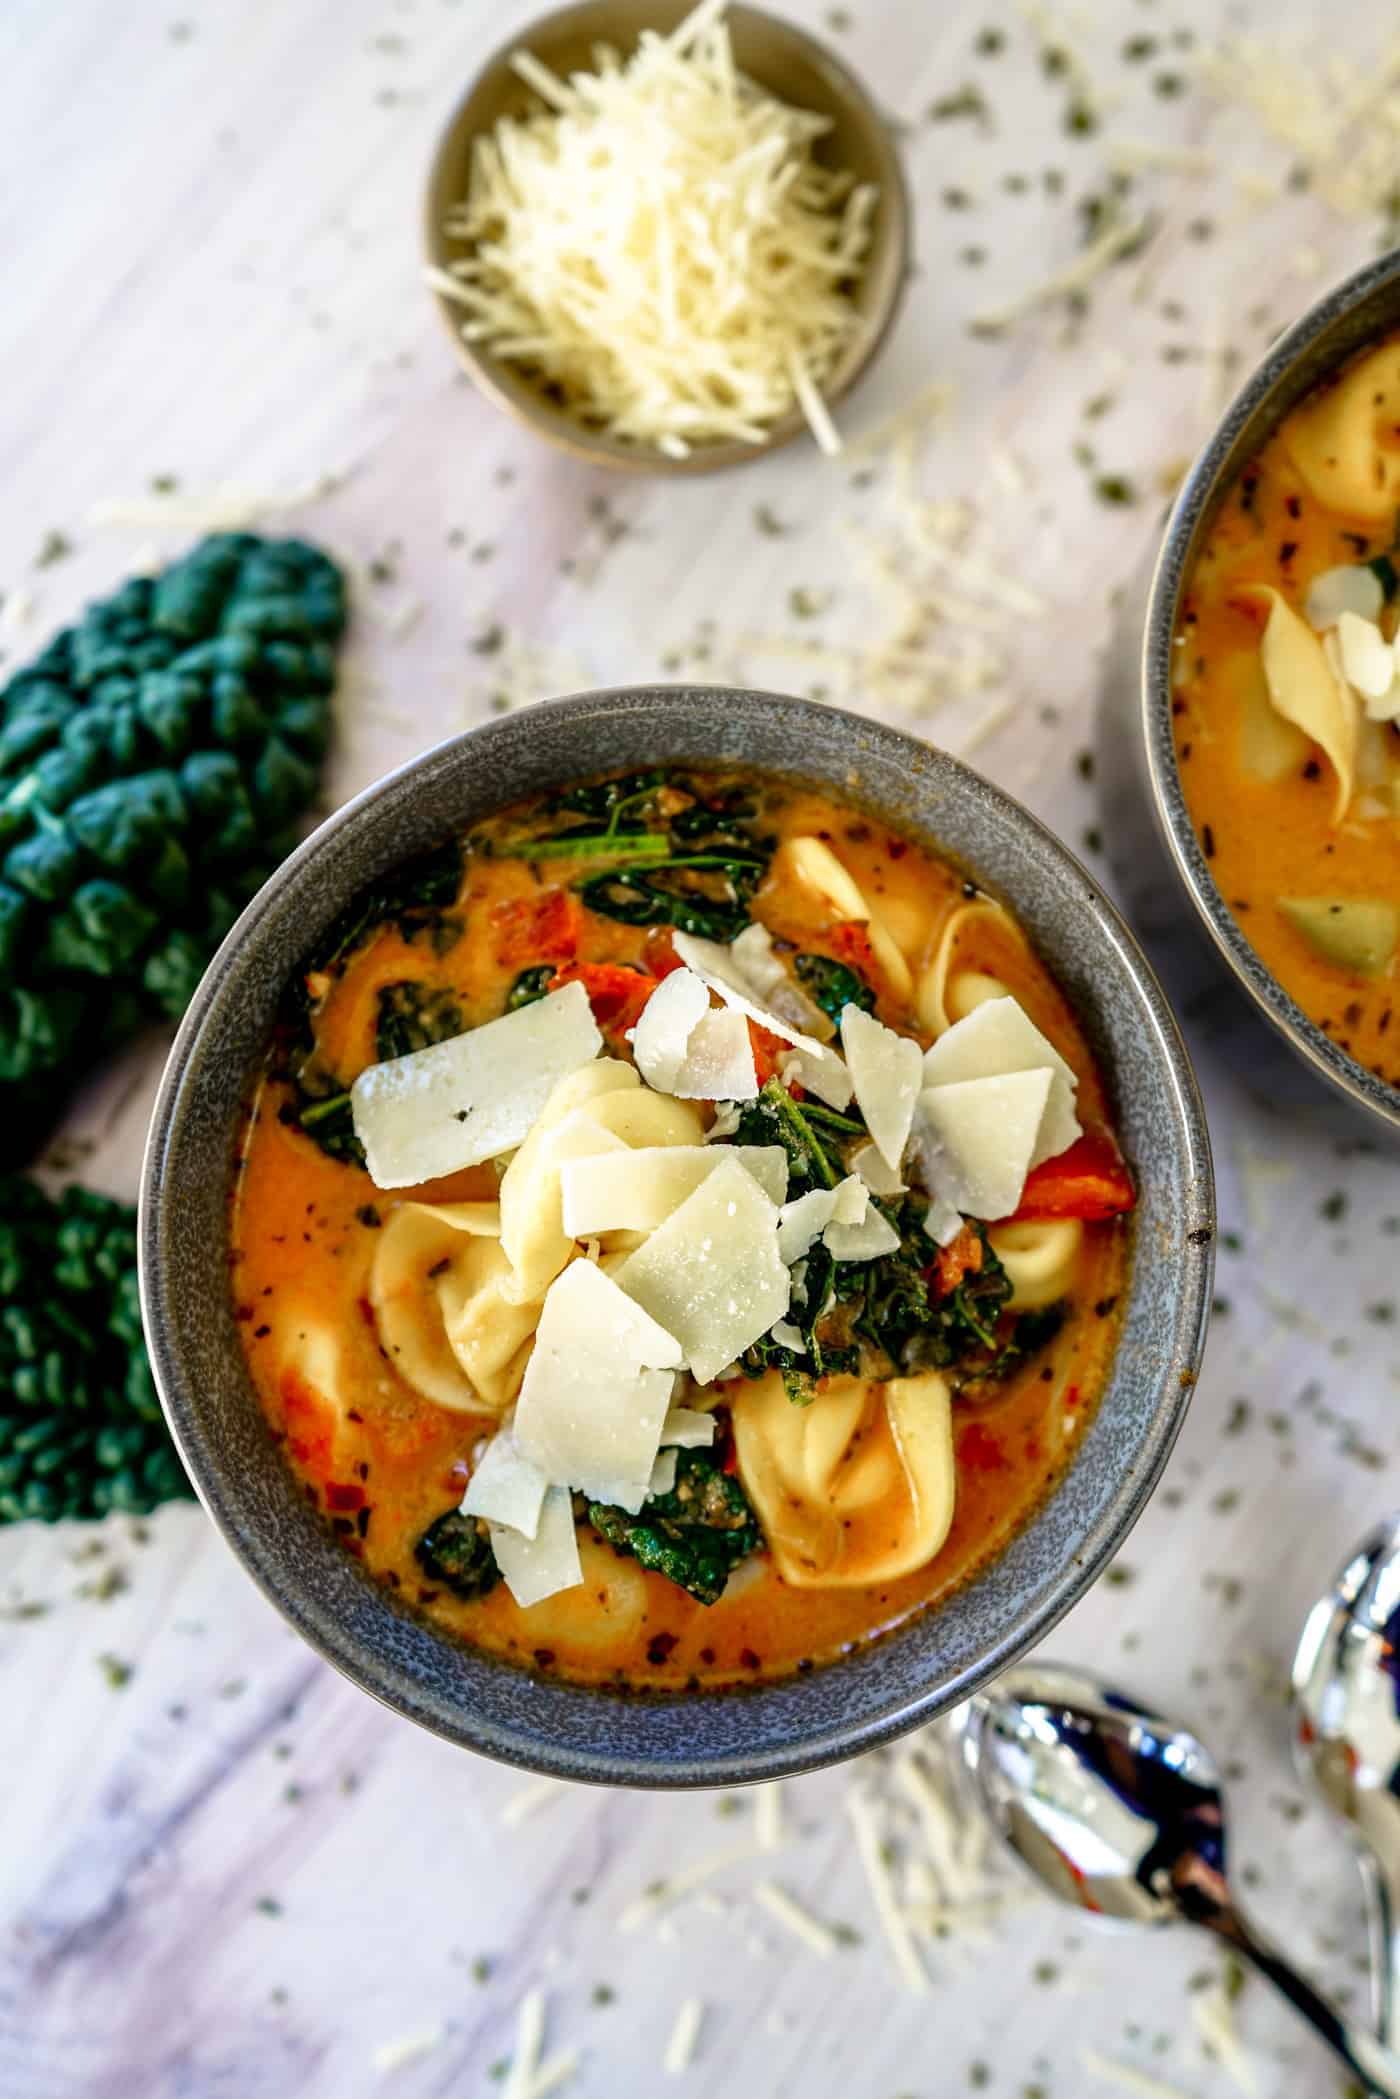 A Lily Love Affair shares a delicious Instant Pot Tortellini Soup recipe topped with parmesan cheese